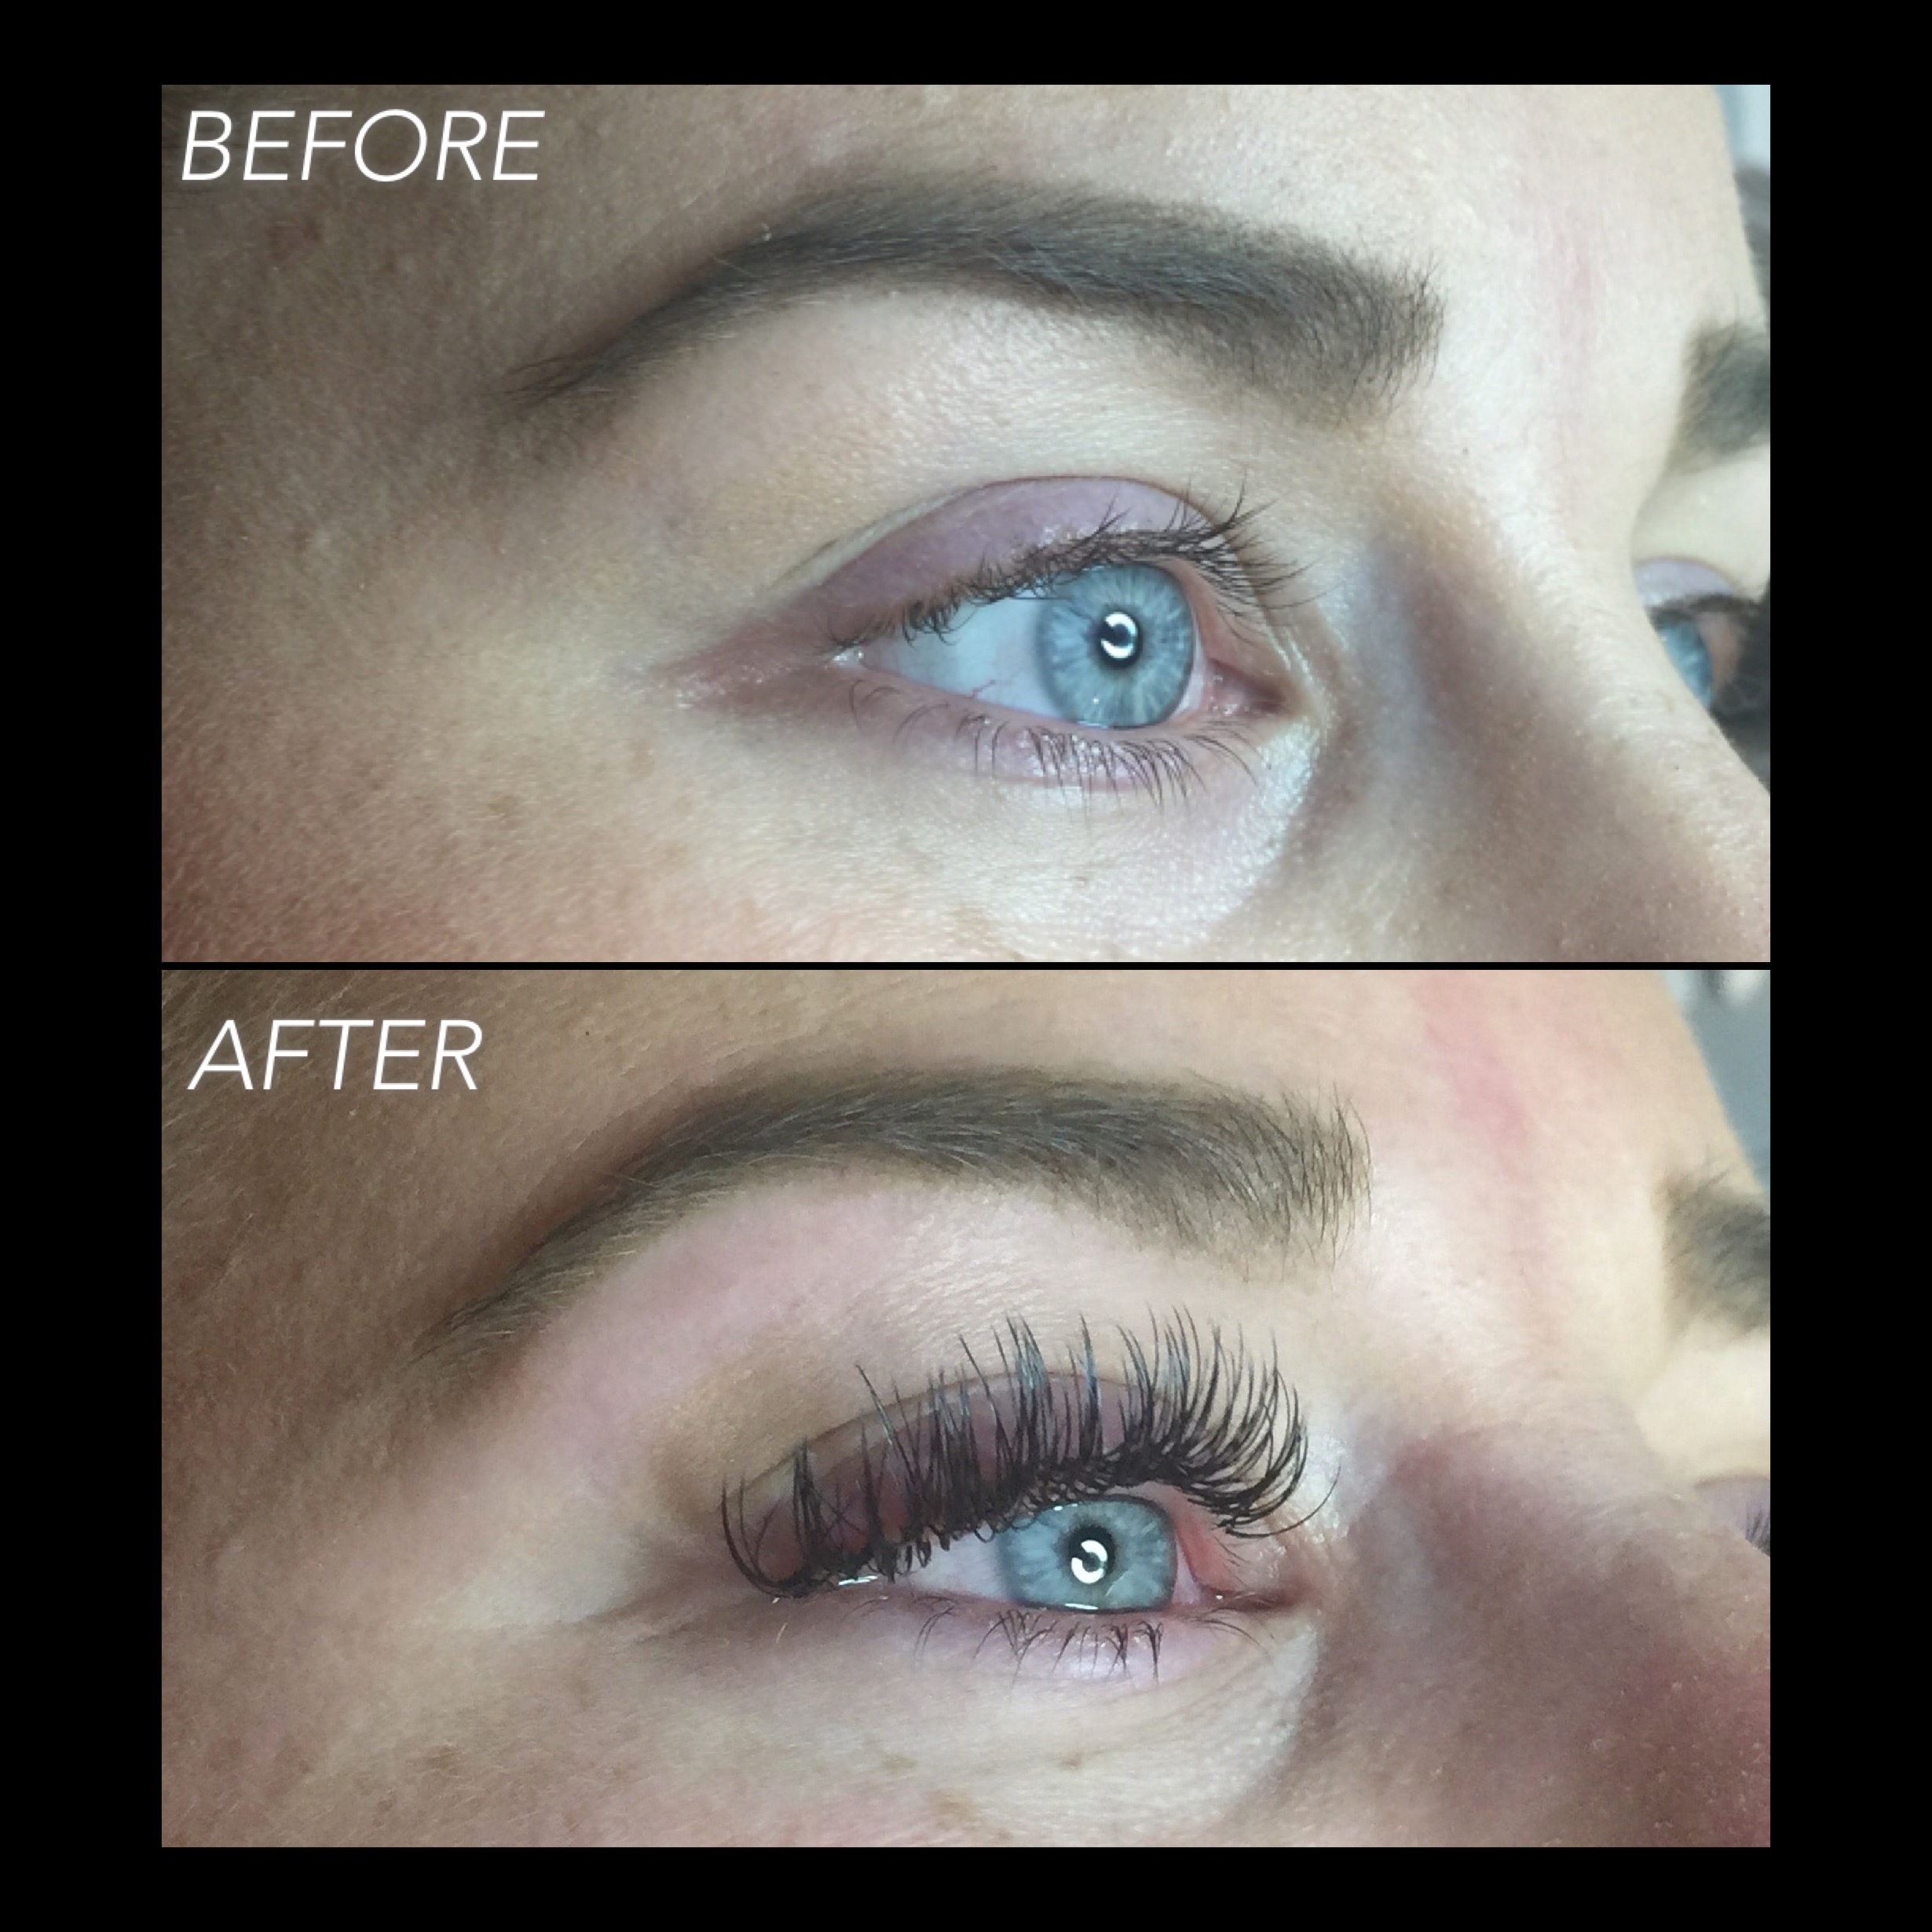 This is the before and after from the picture I used to showcase what damage and improper application looks like. She was a transfer client and I made an executive decision to remove her previous work. Because adhesive remover can cause improper bonding, I had her come back 24 hours later and I applied a fresh new set. Now she has lashes that will live a happy and healthy life!